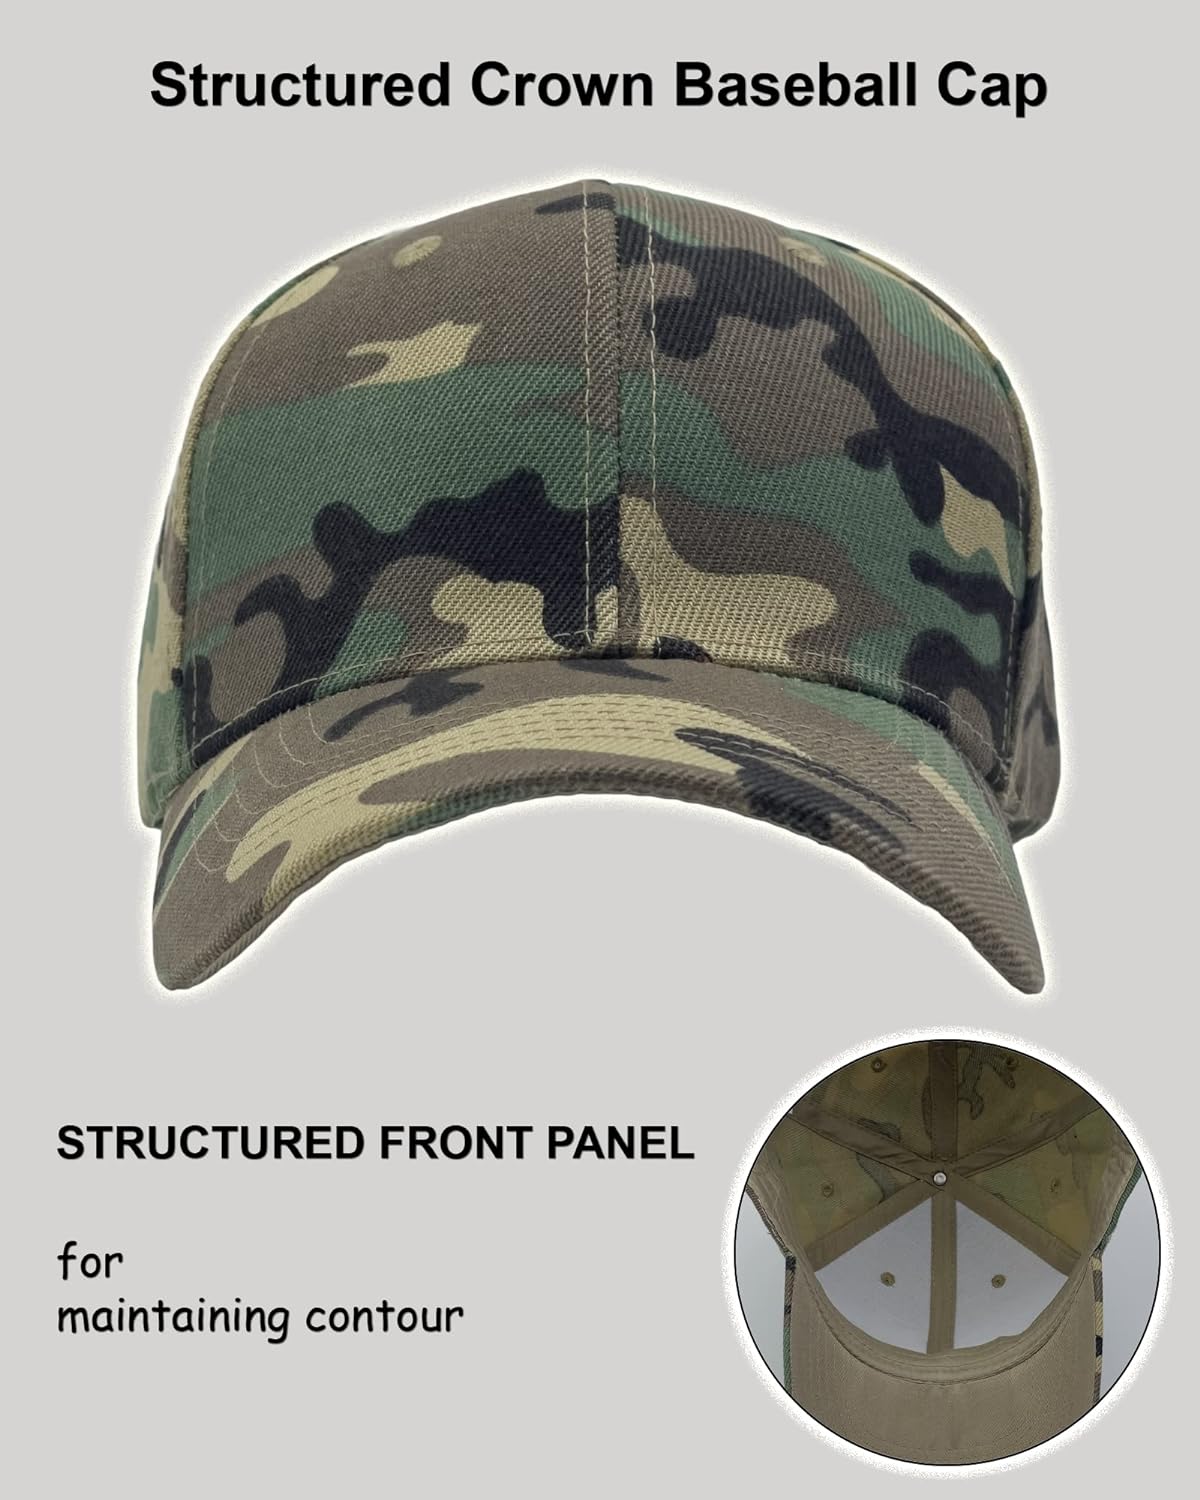 Utmost Structured Baseball Cap with Adjustable Closure - Performance Hat for Outdoor Activities and Custom Embroidery